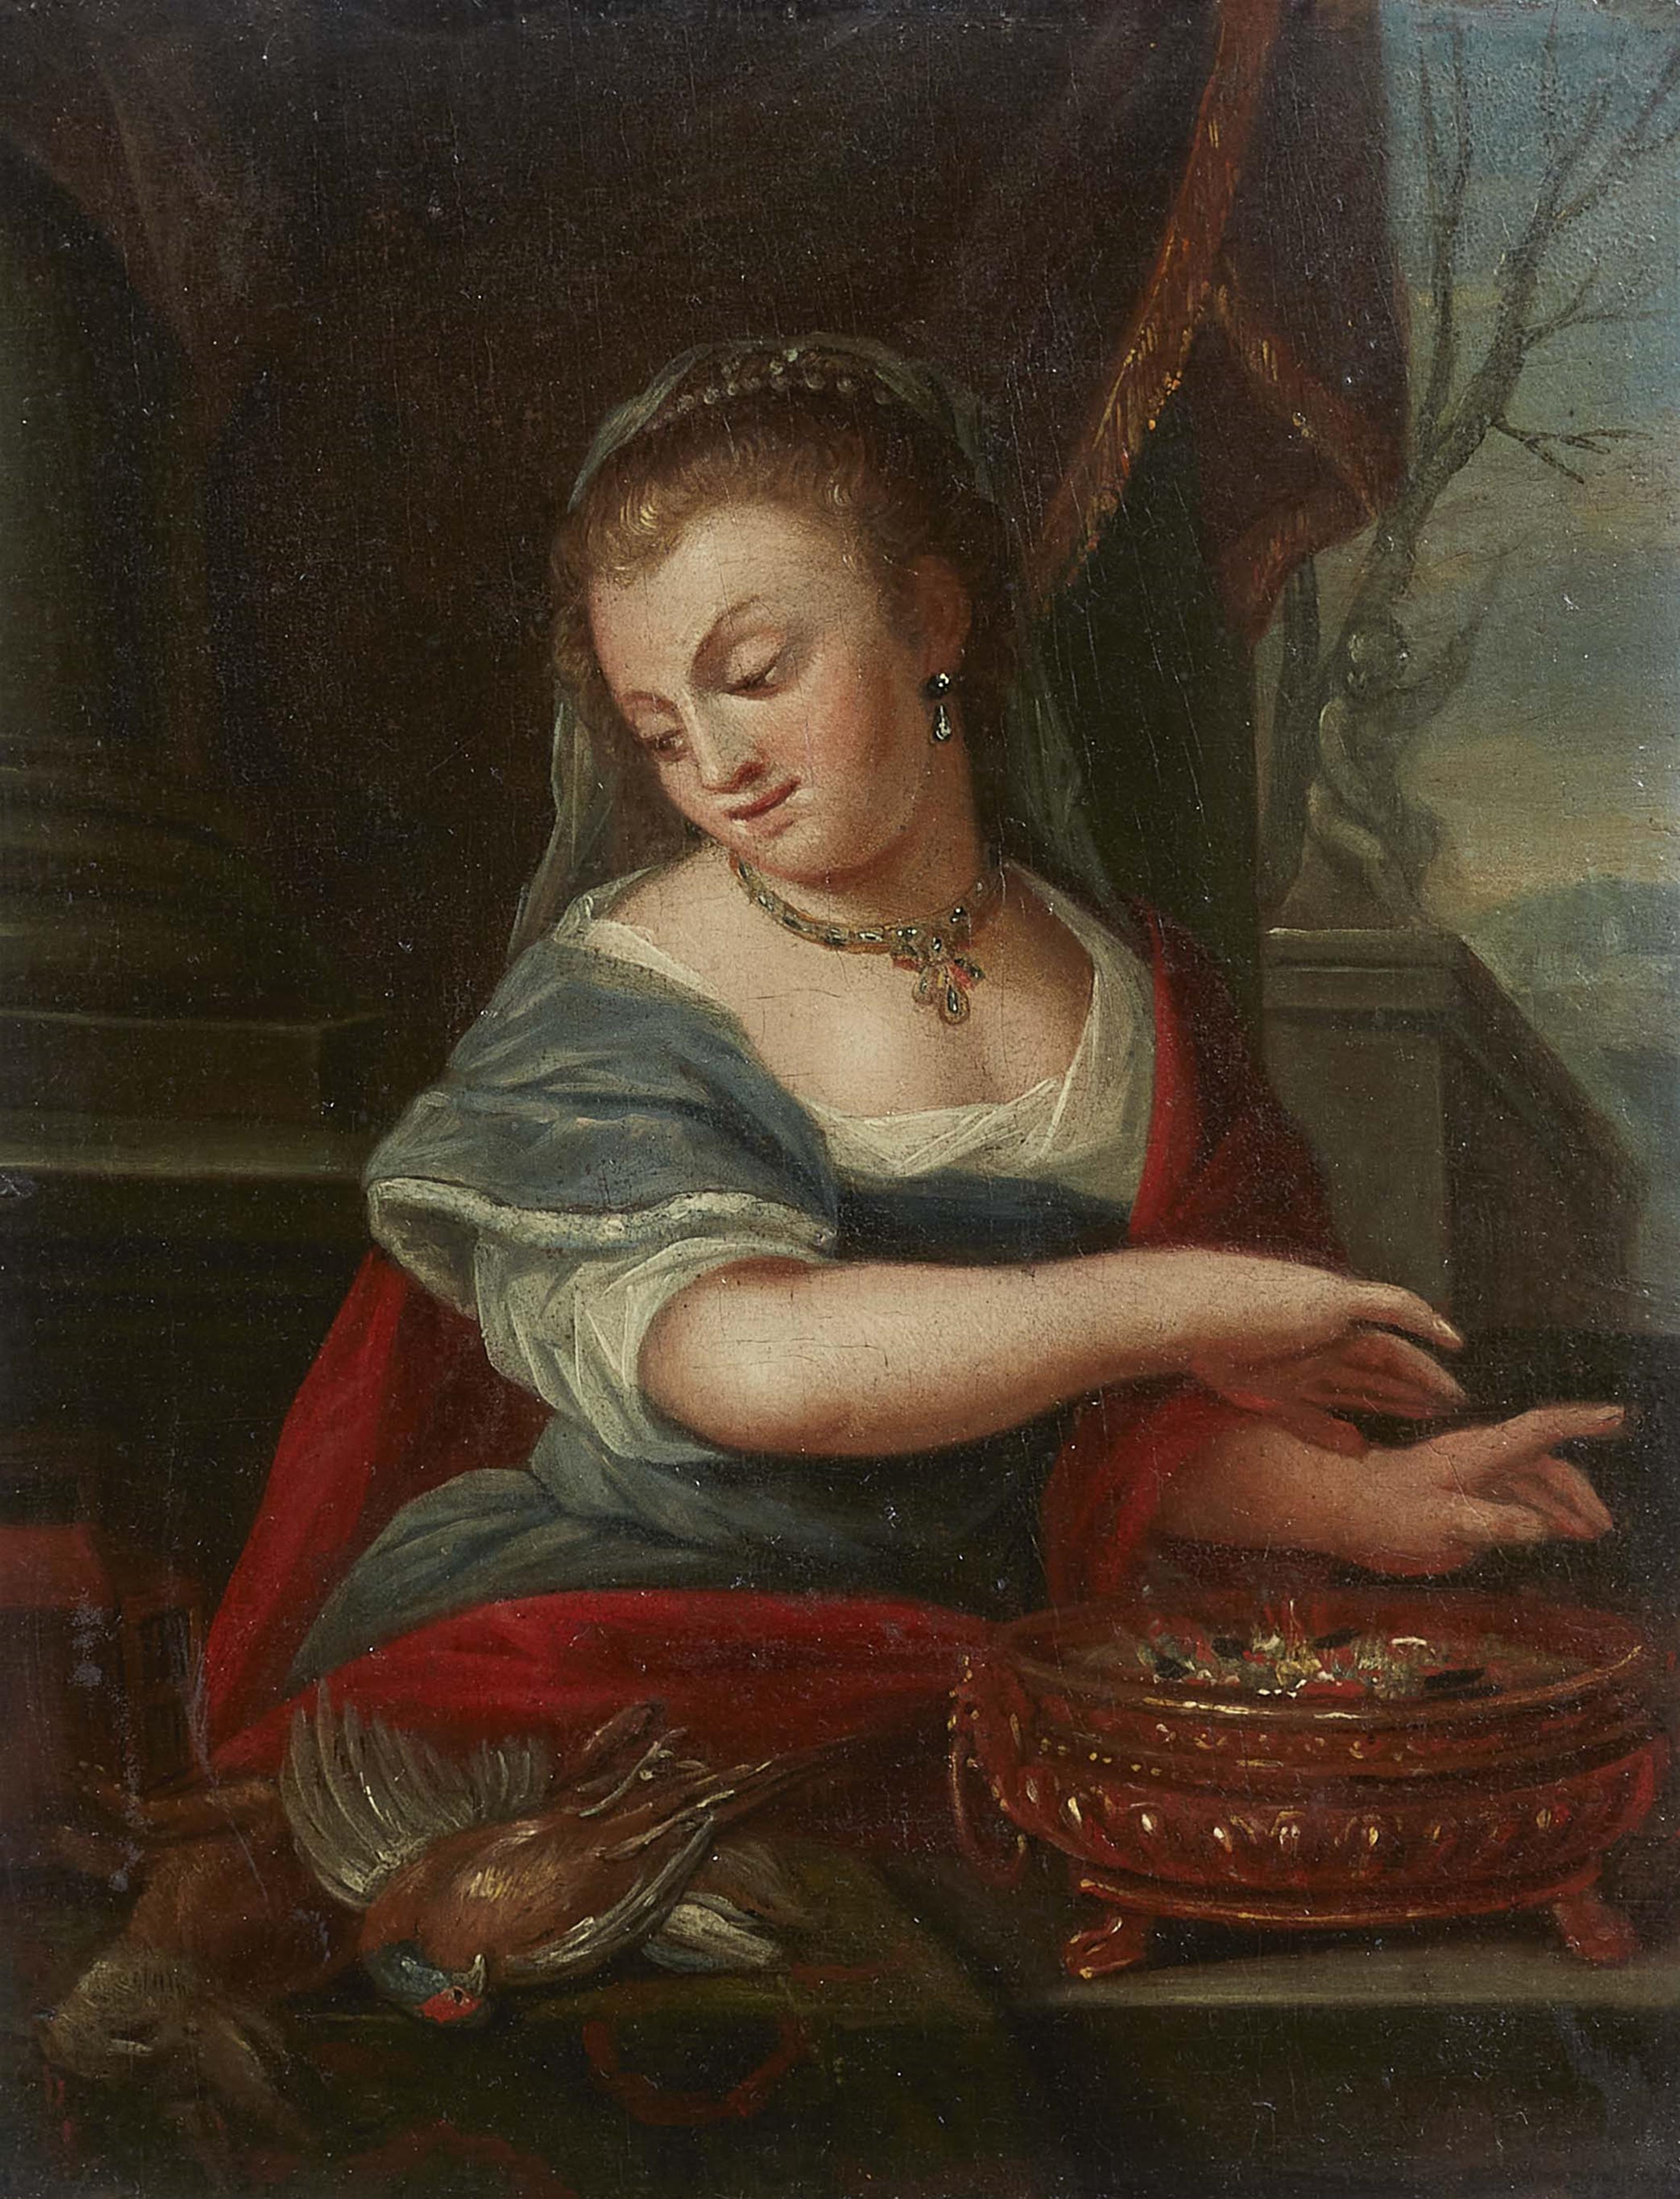 Netherlandish School 18th century - Young Woman with a Brazier and Game - image-1